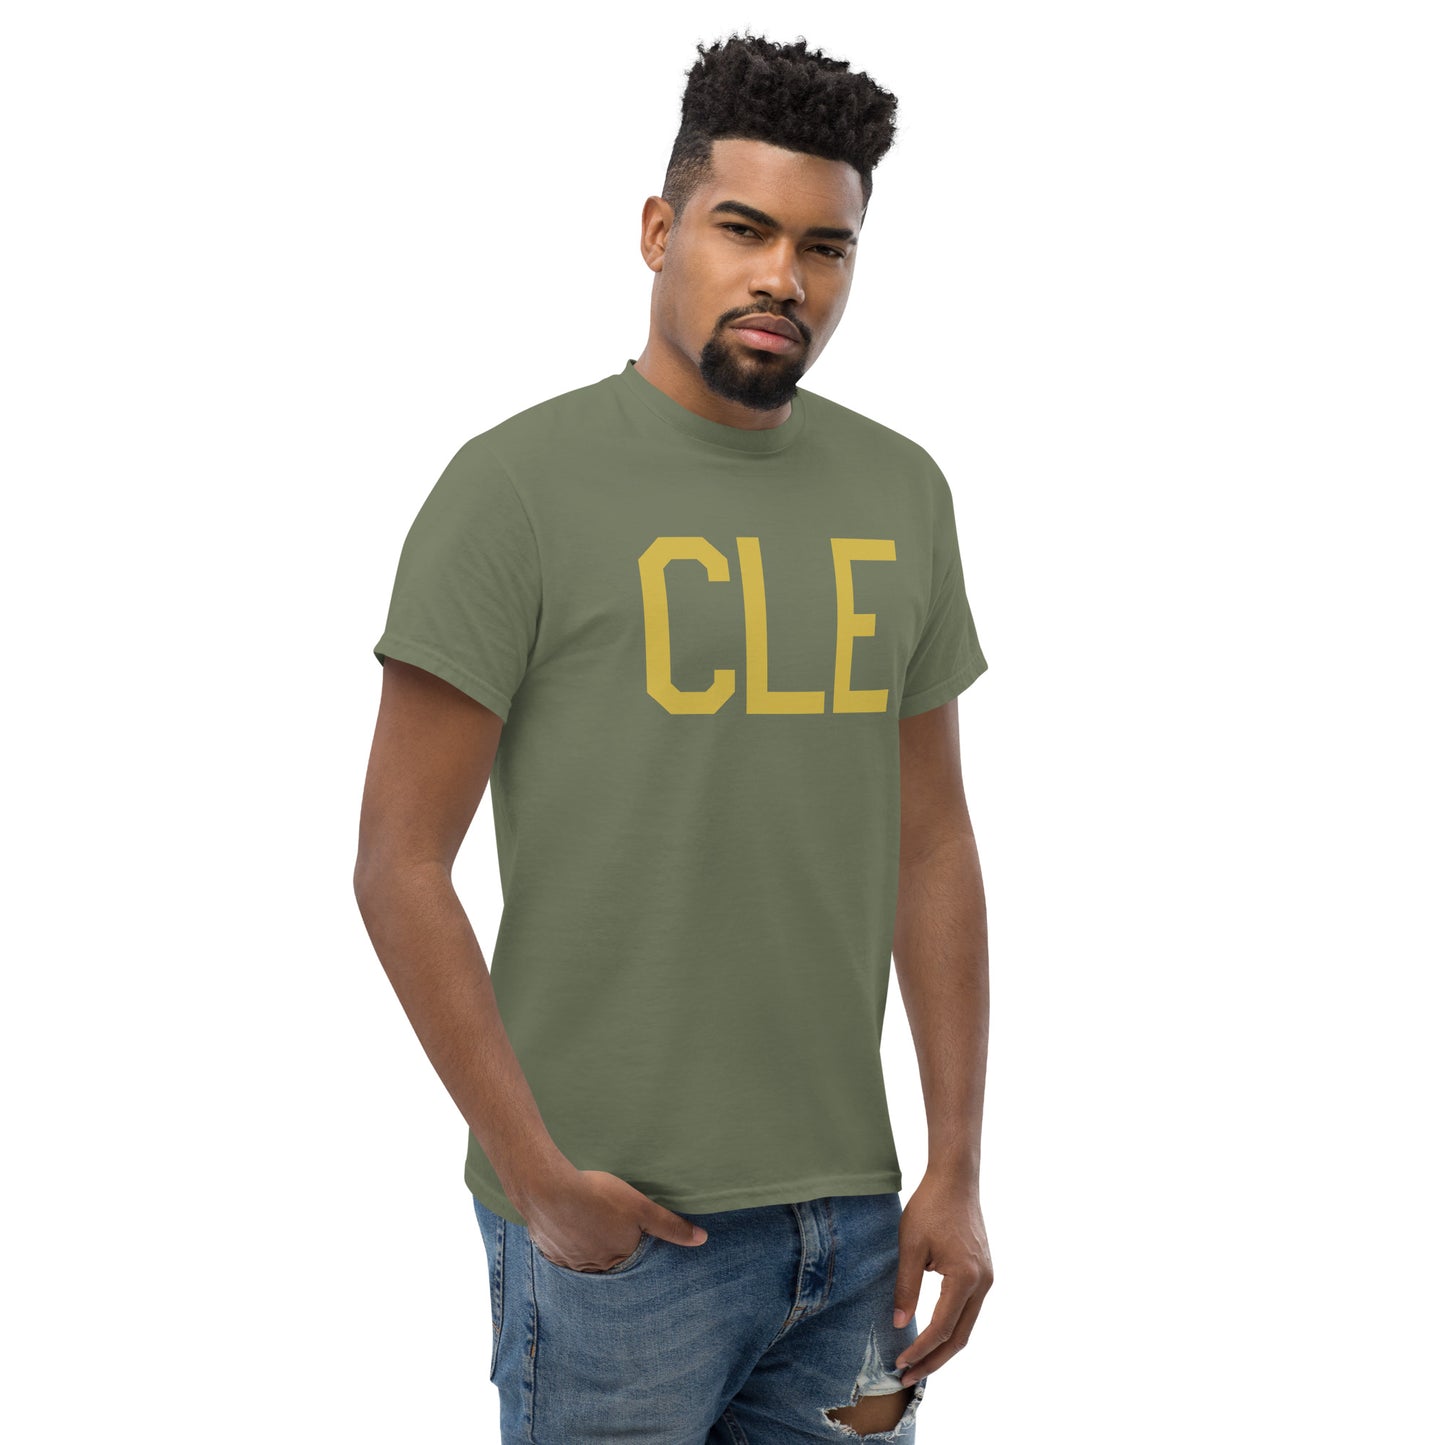 Aviation Enthusiast Men's Tee - Old Gold Graphic • CLE Cleveland • YHM Designs - Image 08